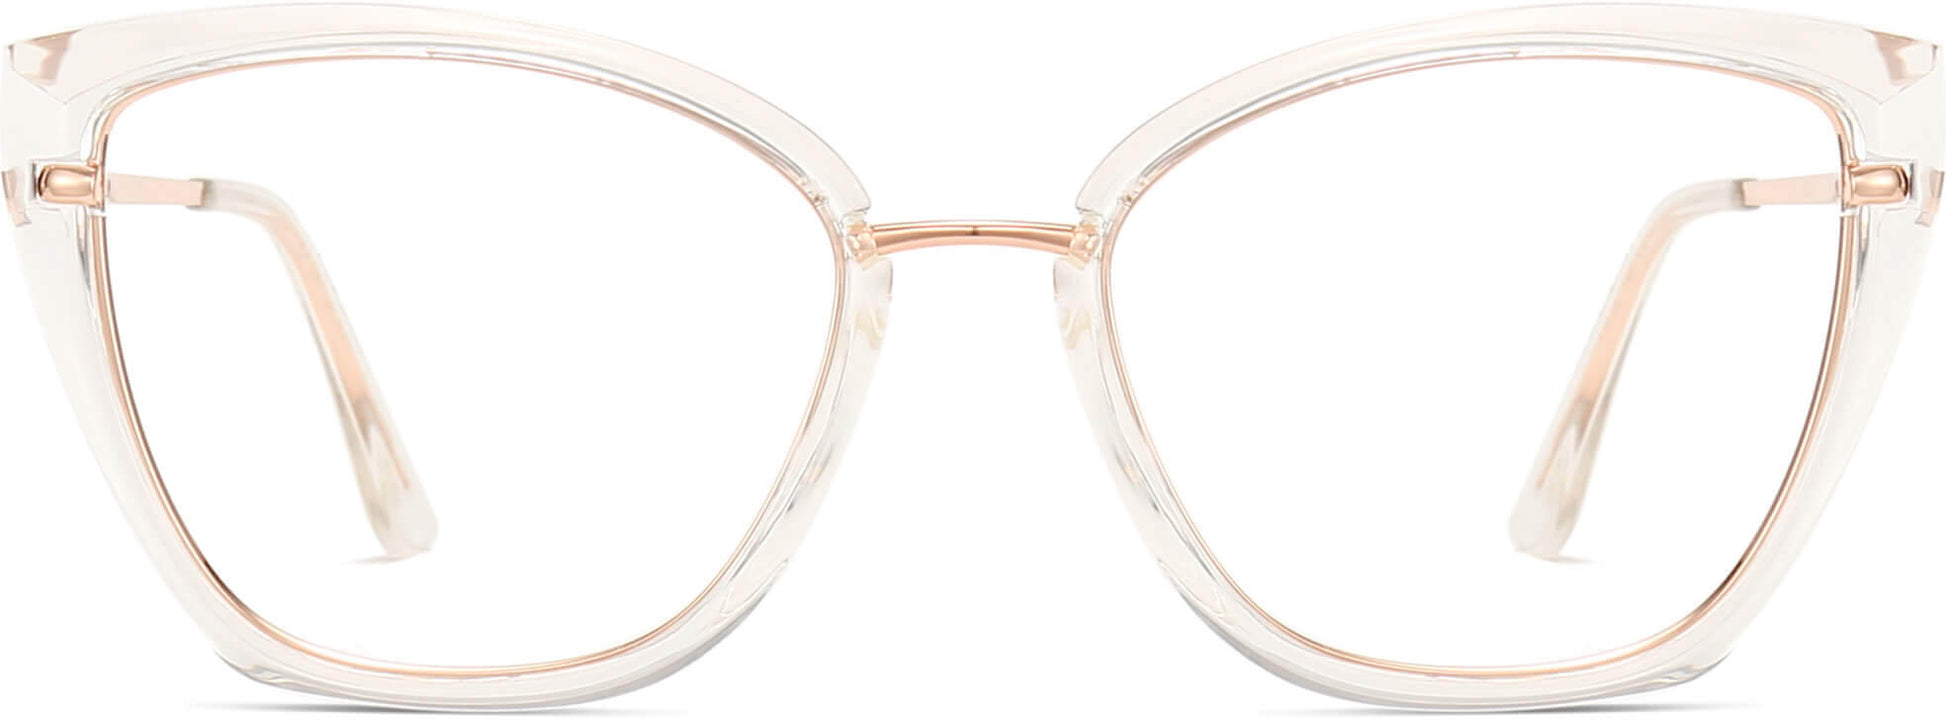 Lia Cateye Clear Eyeglasses from ANRRI, front view